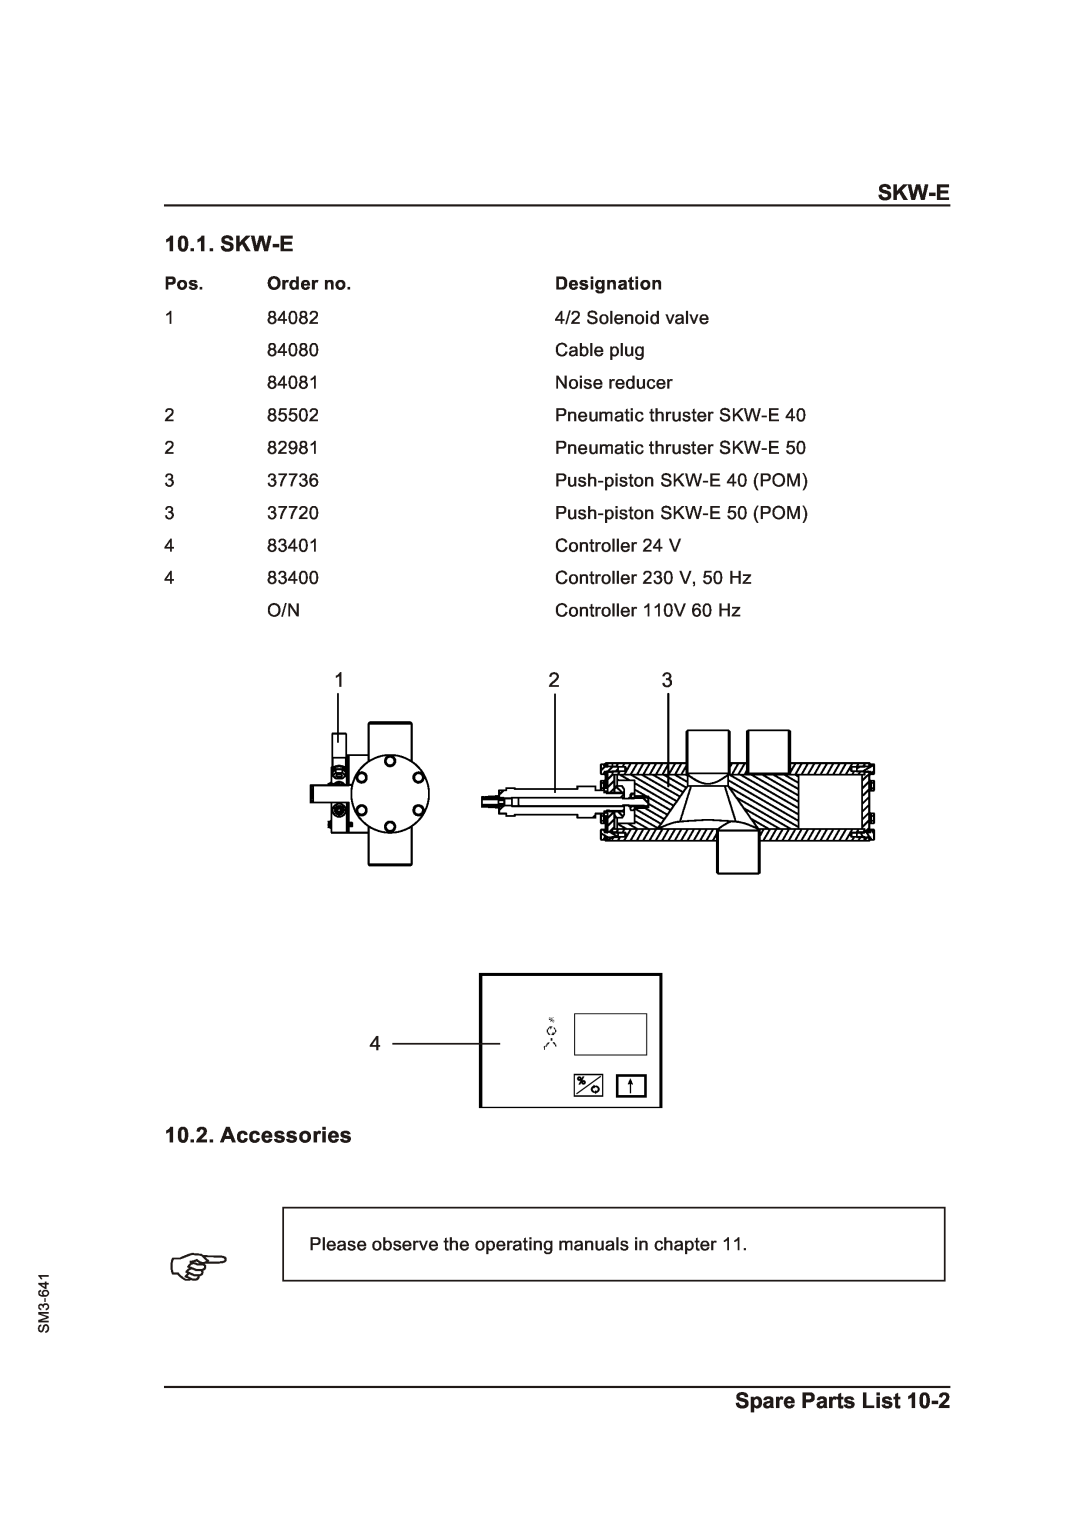 Sterling Plumbing manual SKW-E 10.1. SKW-E, Accessories, Spare Parts List, Order no, Designation 